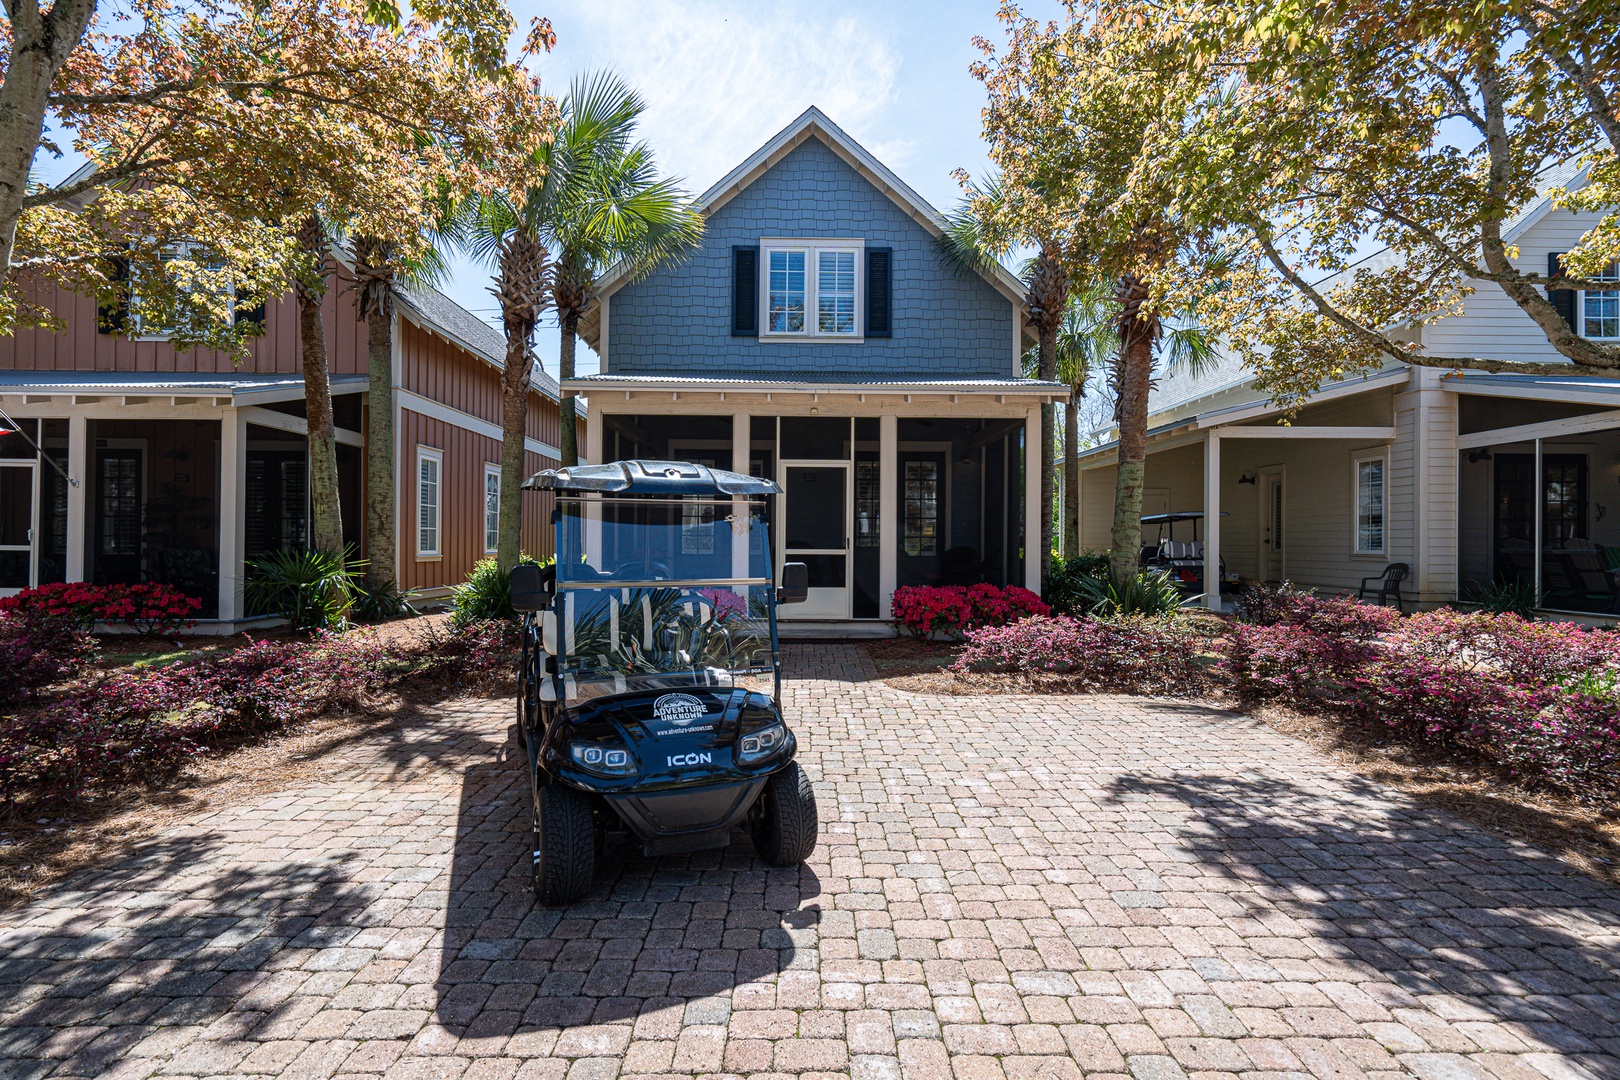 Zip around this exceptional community in your very own golf cart